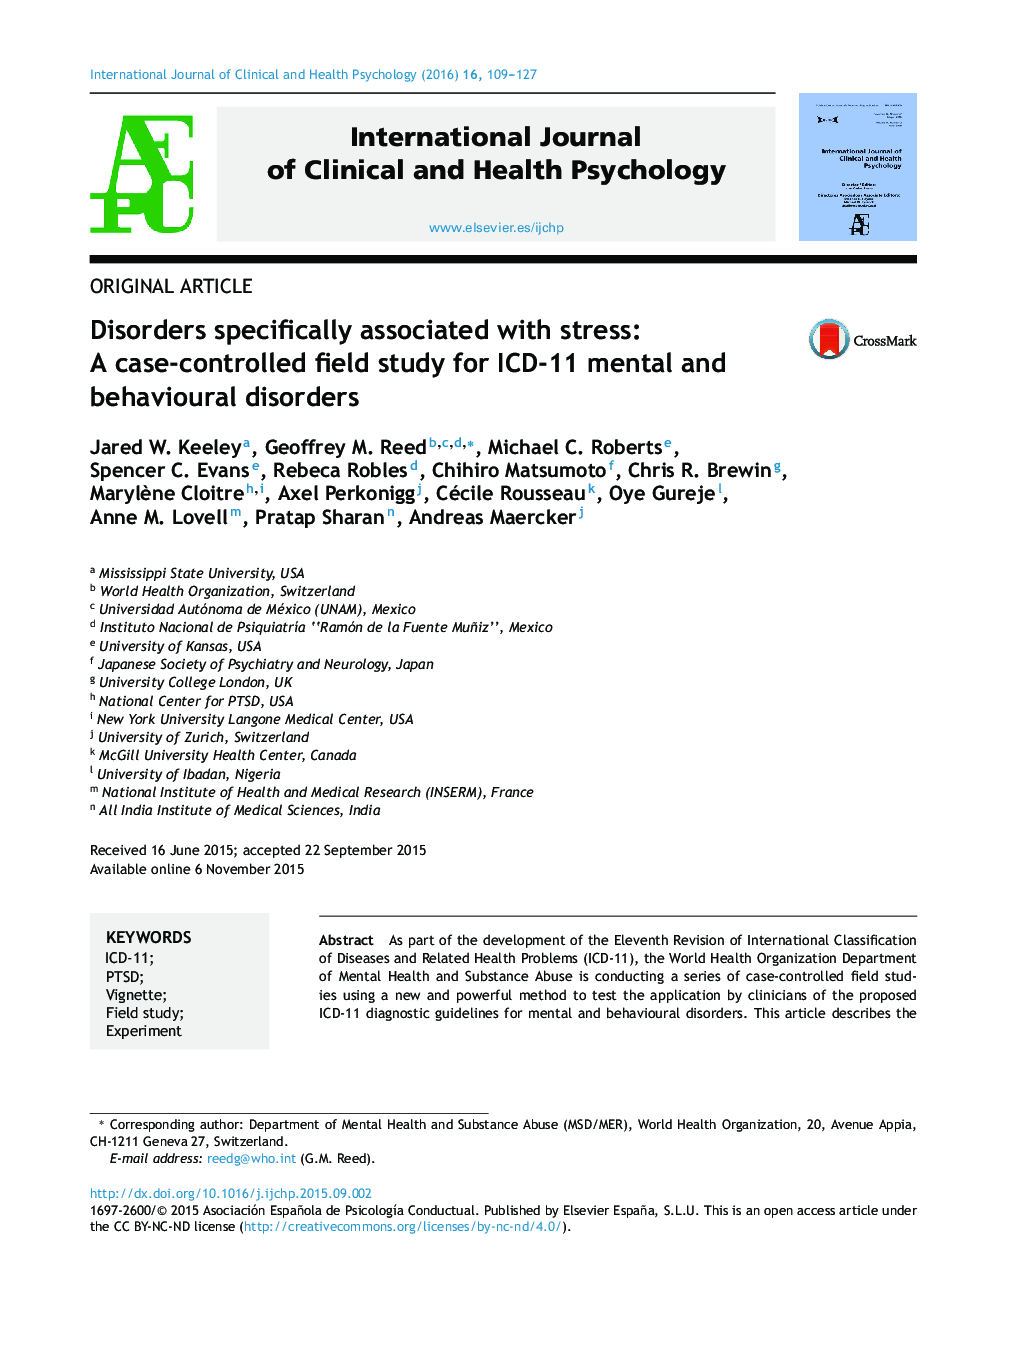 Disorders specifically associated with stress: A case-controlled field study for ICD-11 mental and behavioural disorders